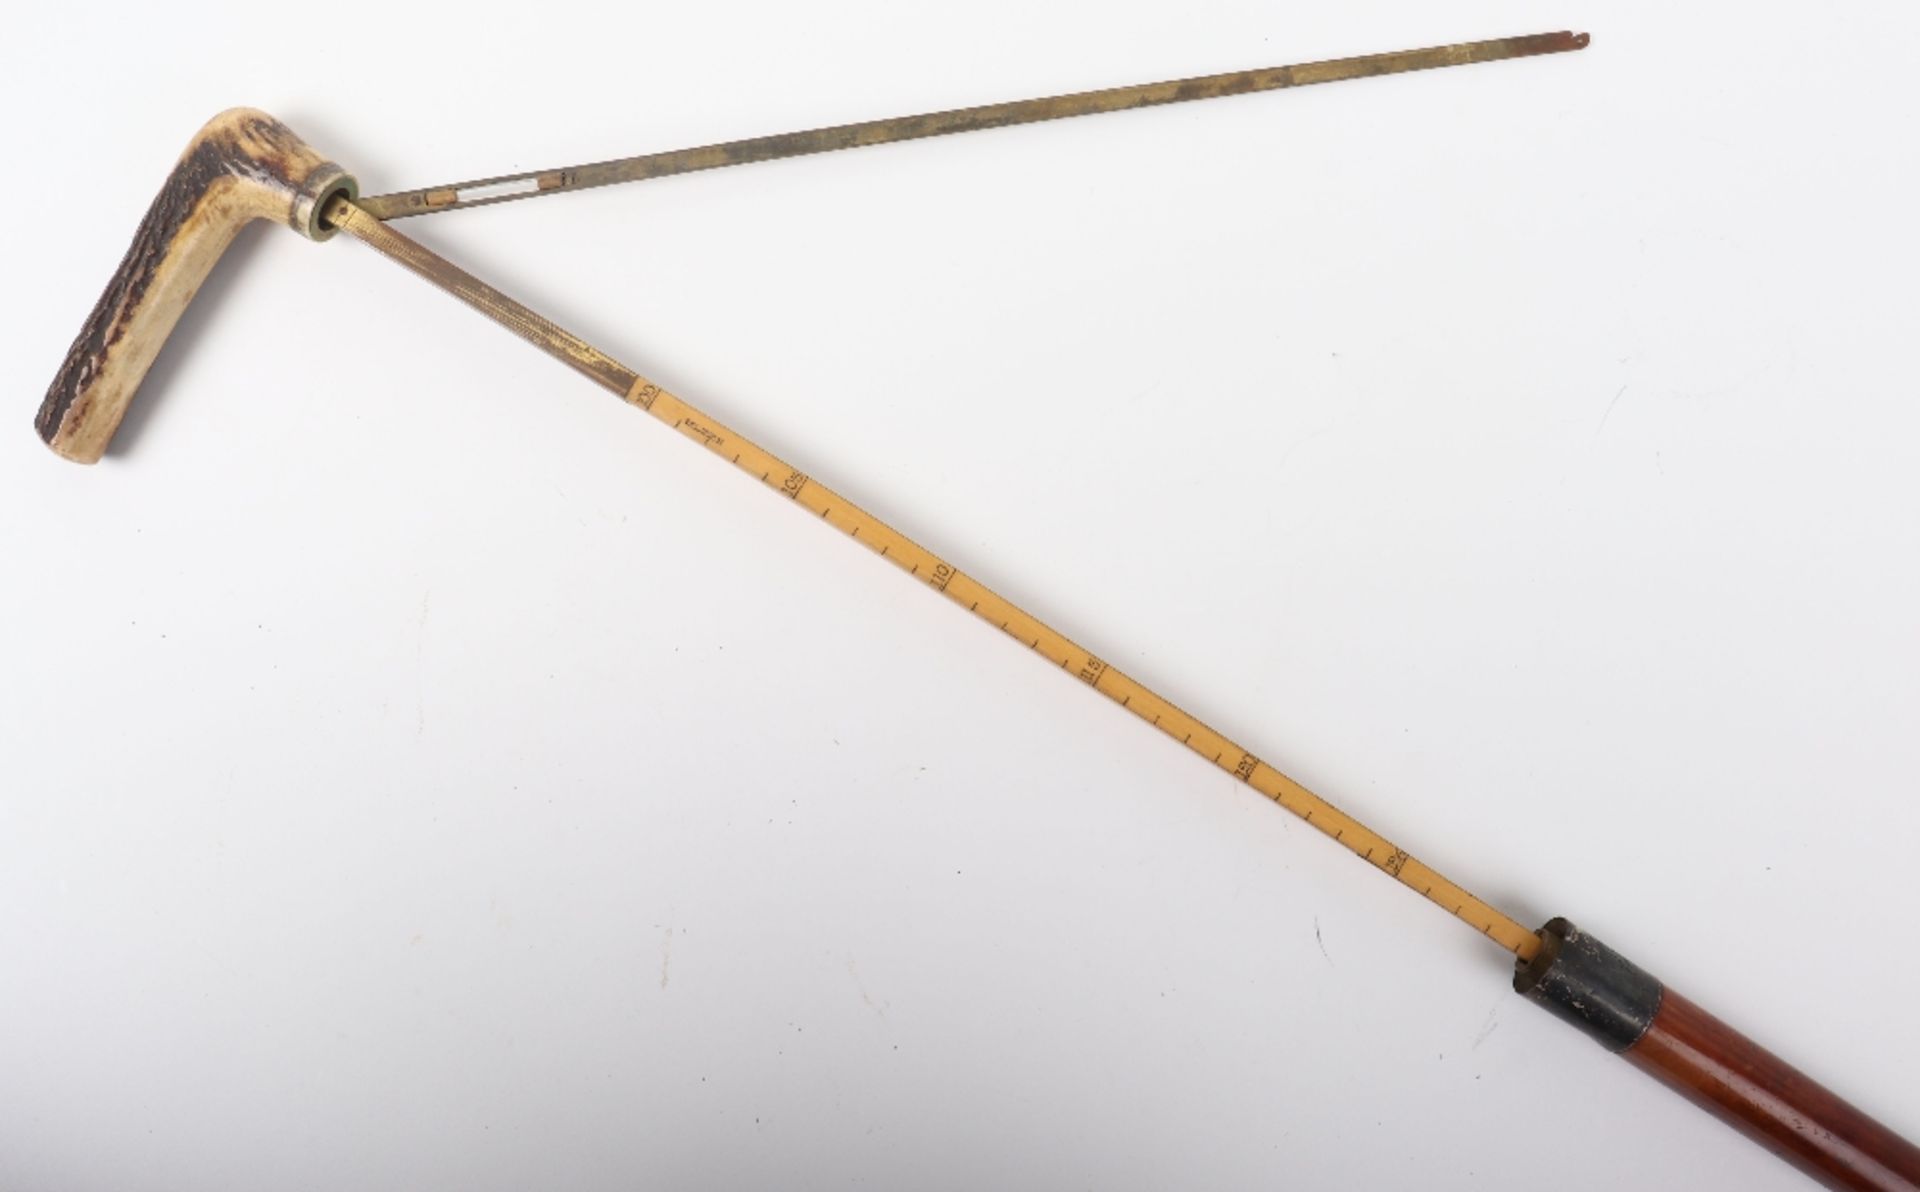 An Edwardian walking stick with spirit level (lacking liquid) and scaled ruler, with horn handle - Image 9 of 14